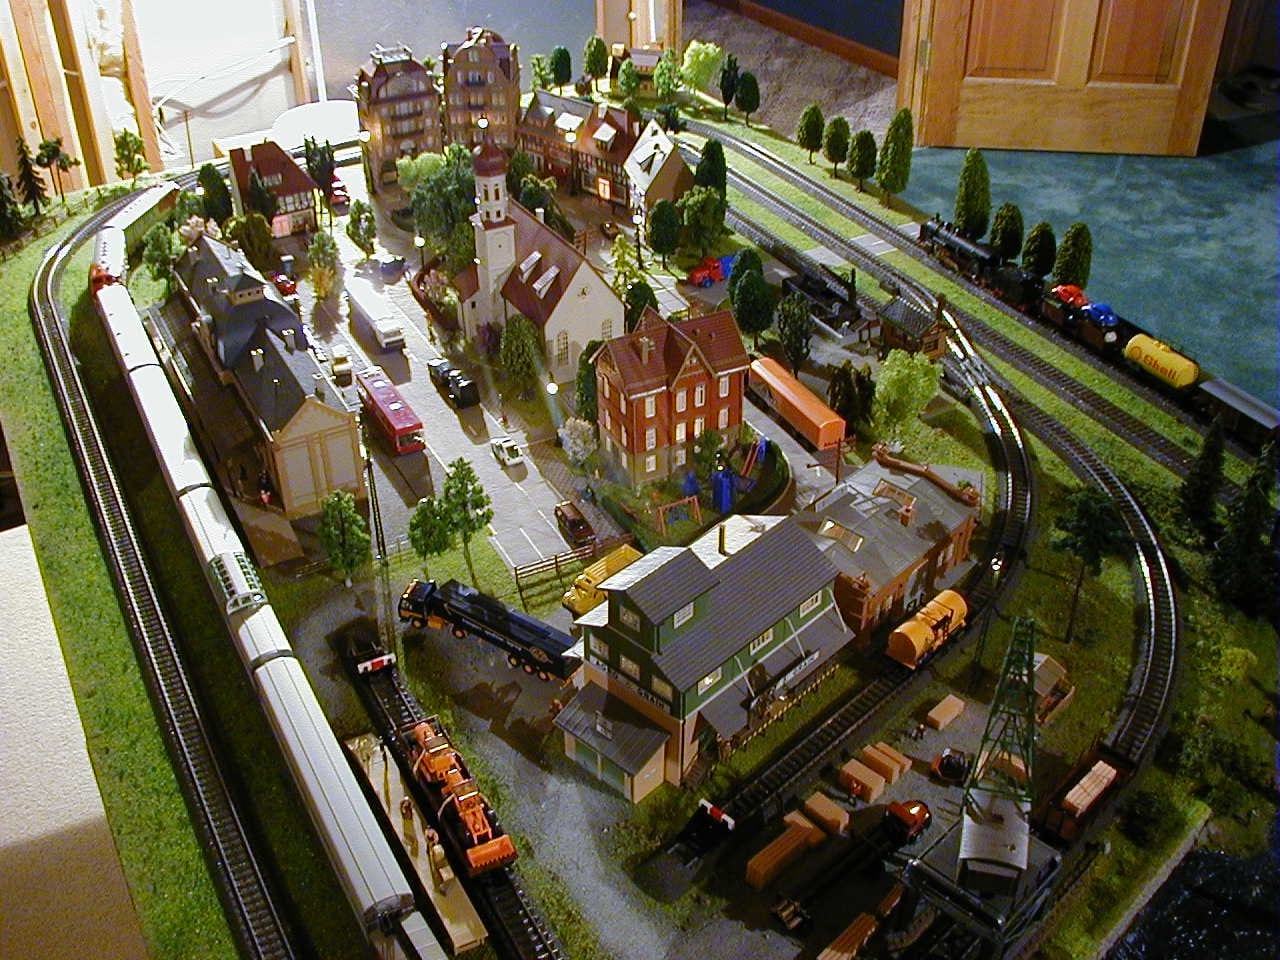  train layout click for details 4x8 model train layout ho in ho updated